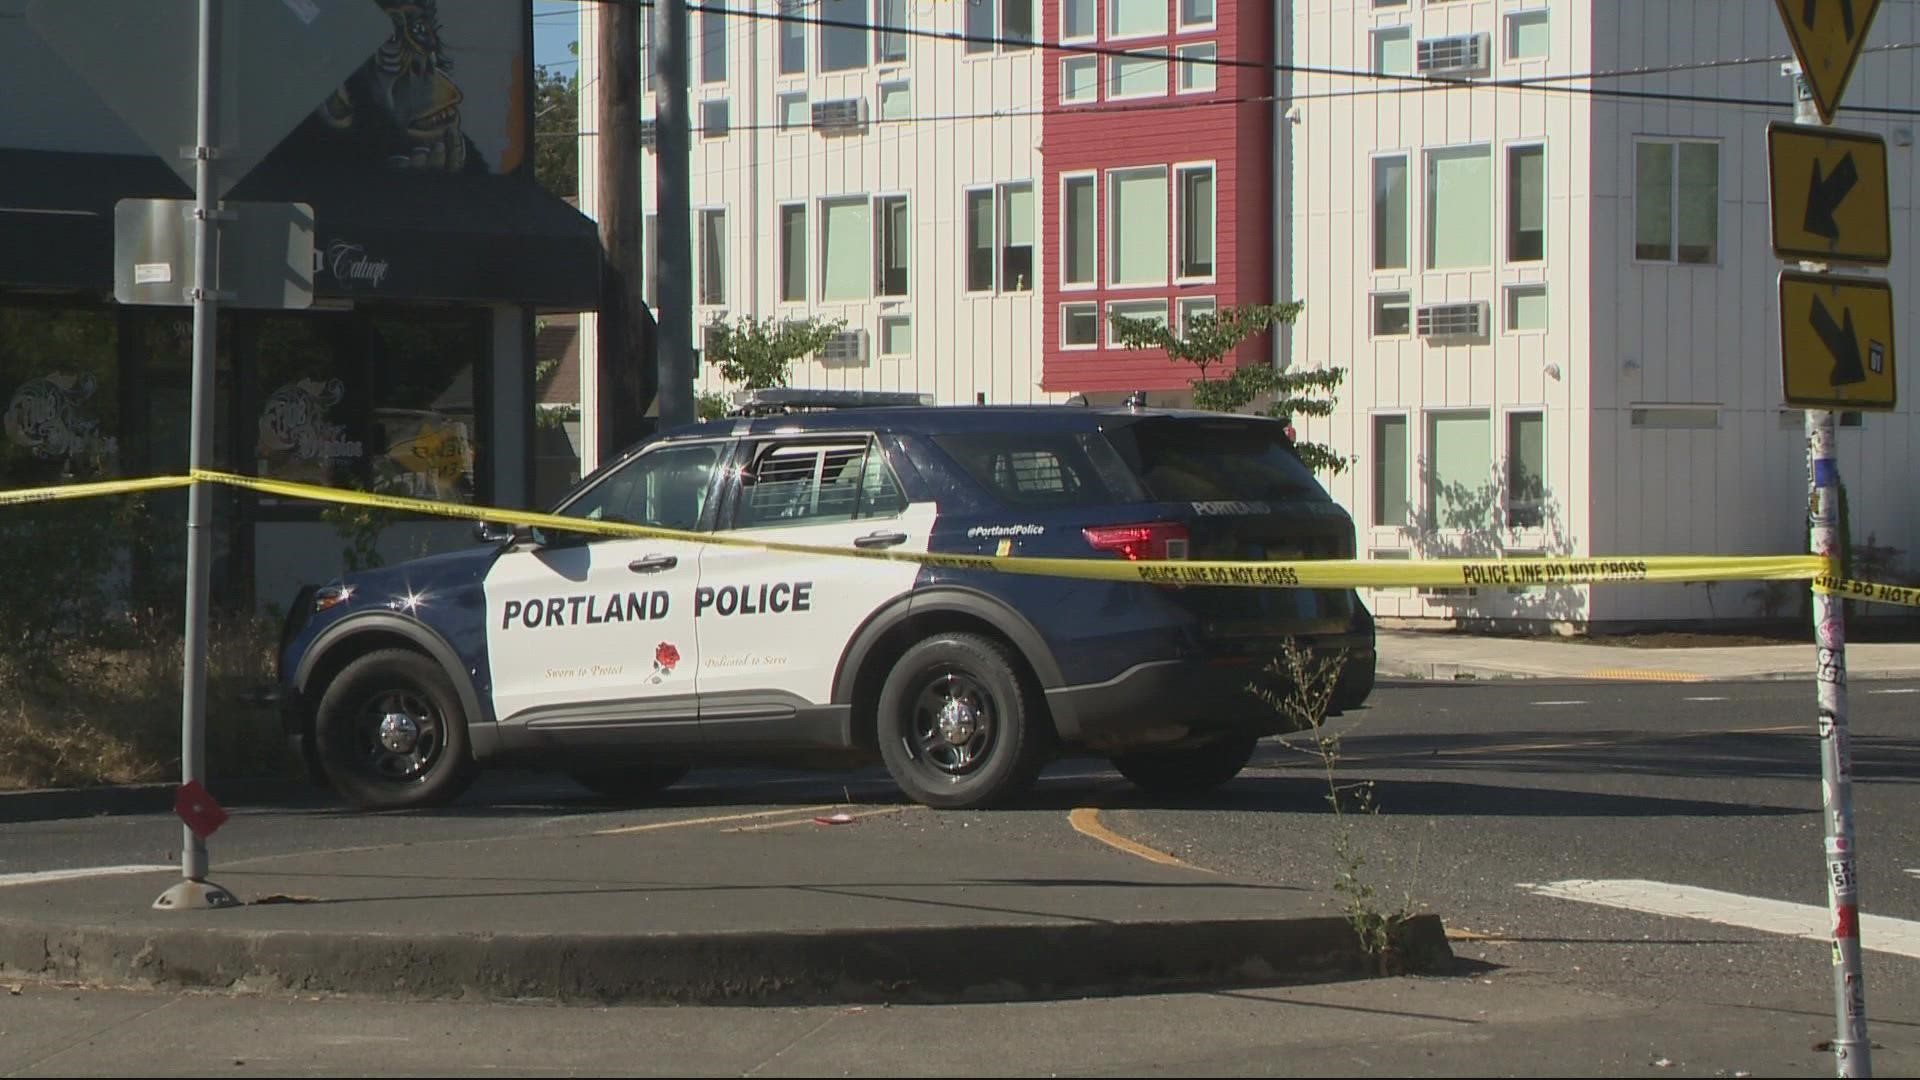 Portland police said that they have launched a homicide investigation after responding to reports of a man found dead inside his home.